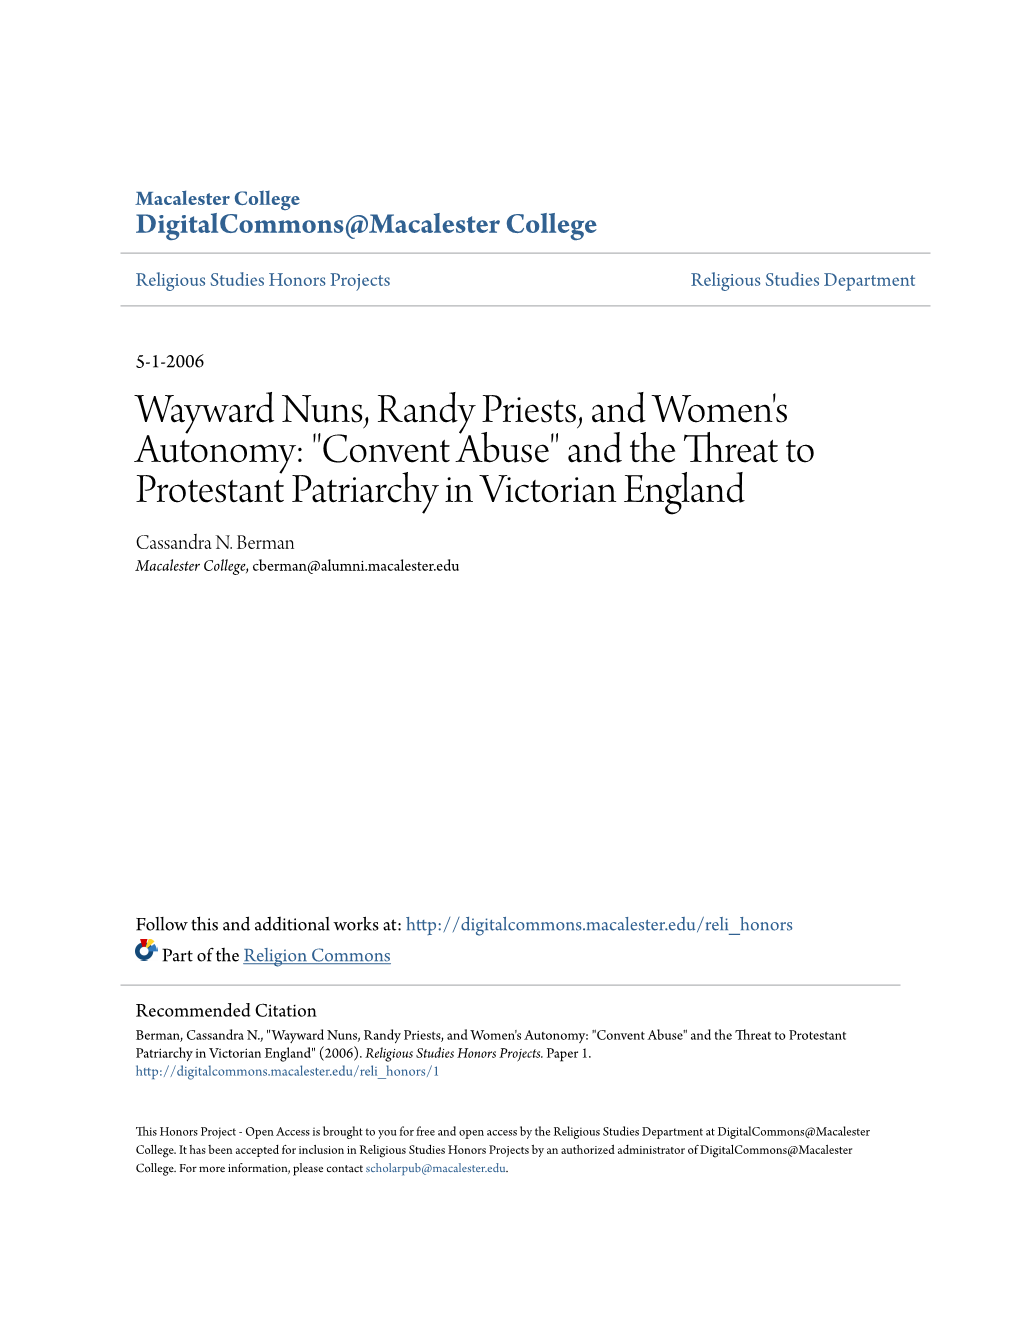 Wayward Nuns, Randy Priests, and Women's Autonomy: "Convent Abuse" and the Threat to Protestant Patriarchy in Victorian England Cassandra N